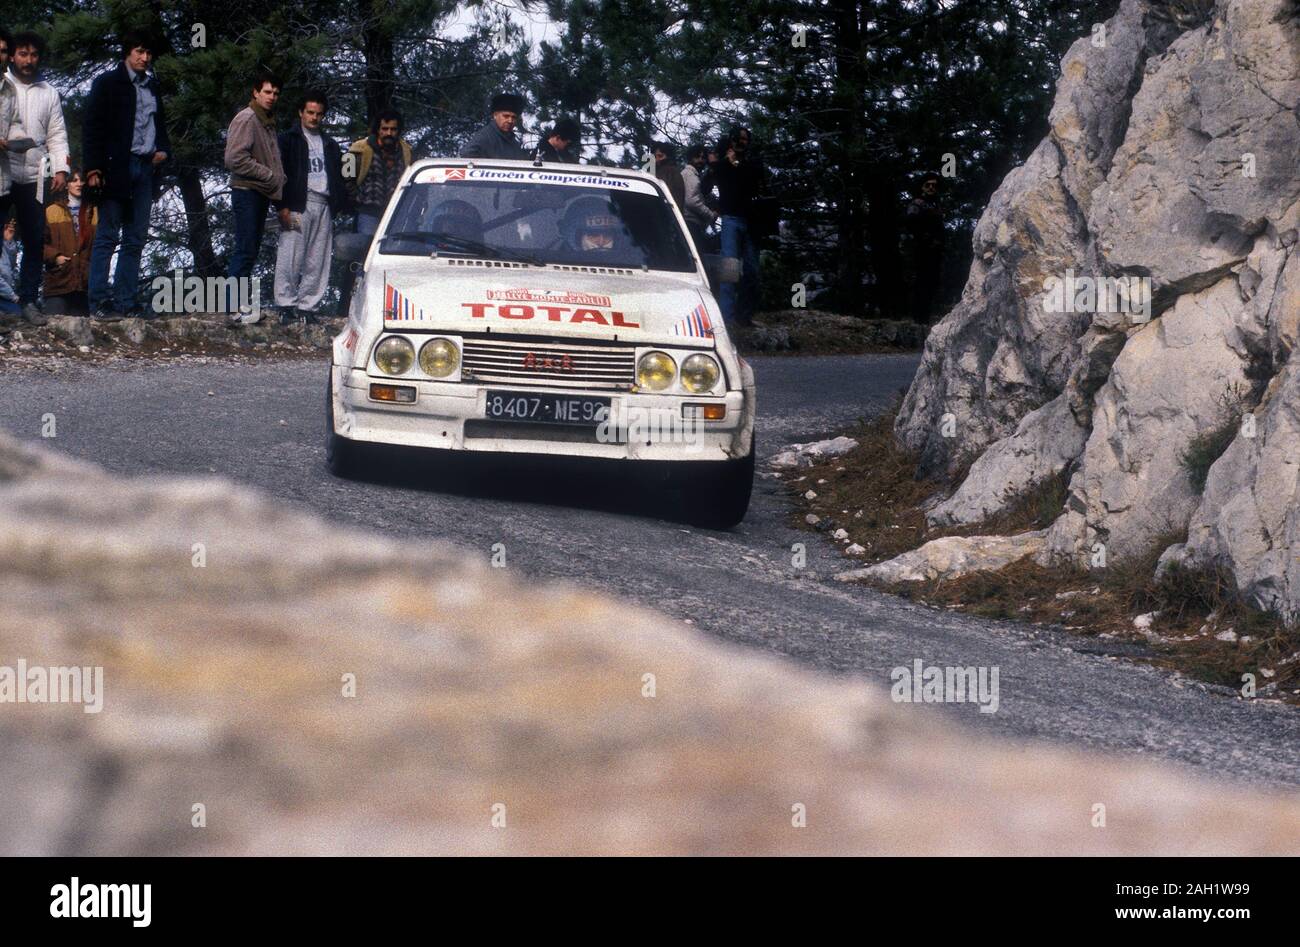 Citroen visa rally car hi-res stock photography and images - Alamy